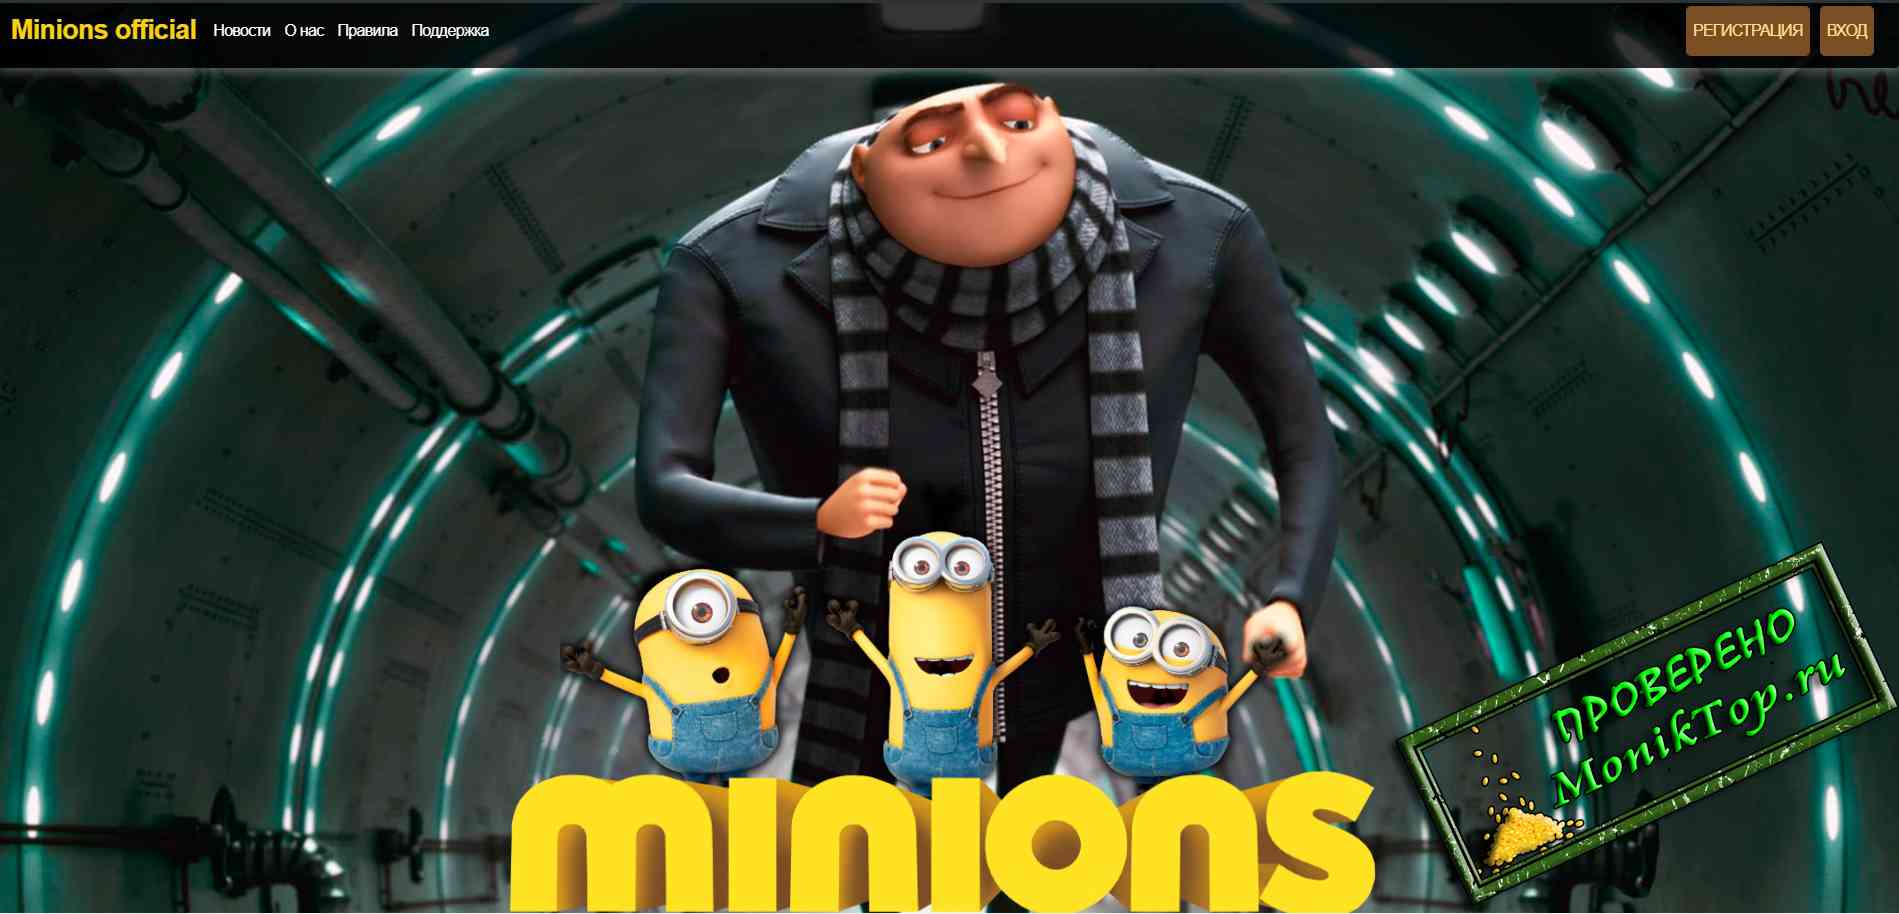 Minions-official